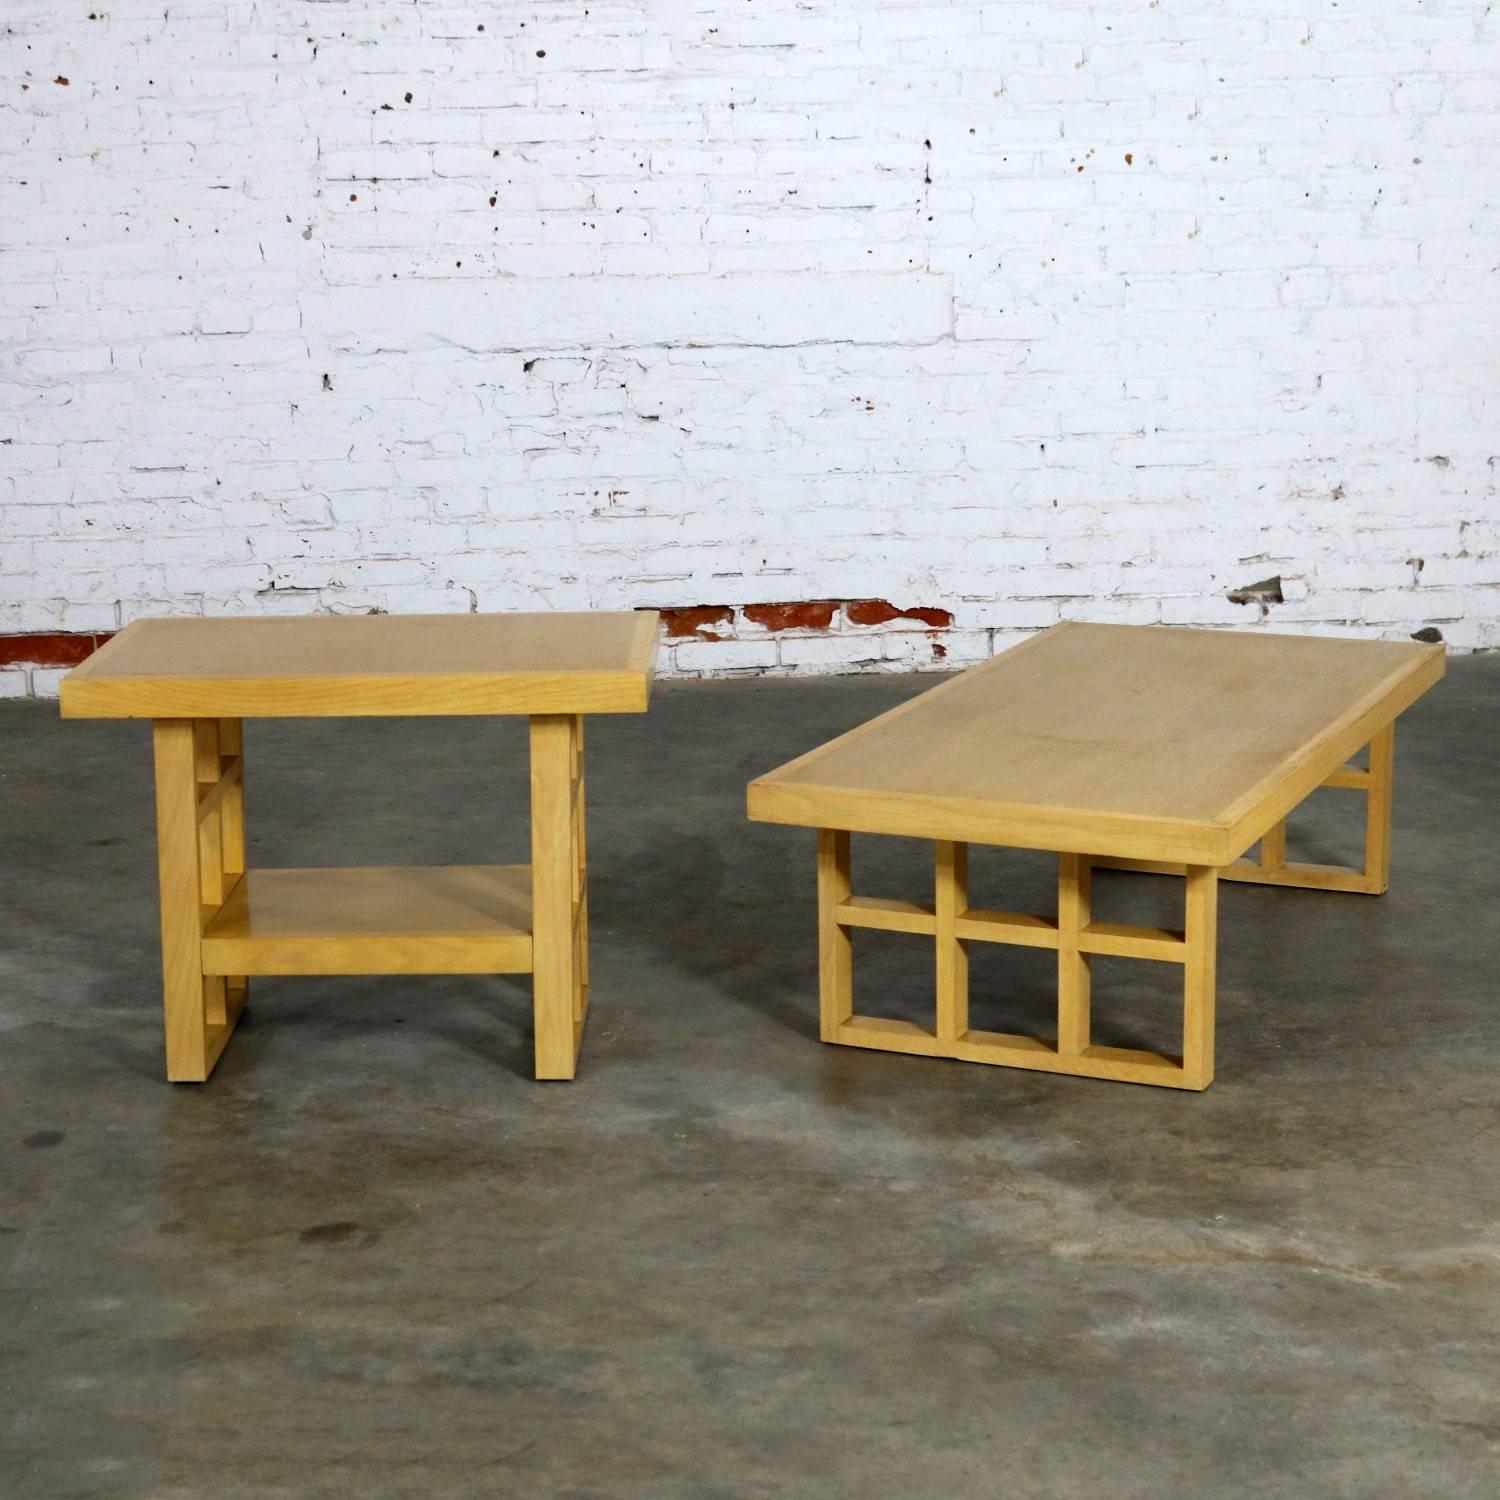 Incredible pair of Mid-Century Modern blonde oak tables with a window pane leg design. One end table and one coffee table. They are in wonderful vintage condition with normal wear for age and use. Please see photos, circa 1950s.

Cool, cool, cool